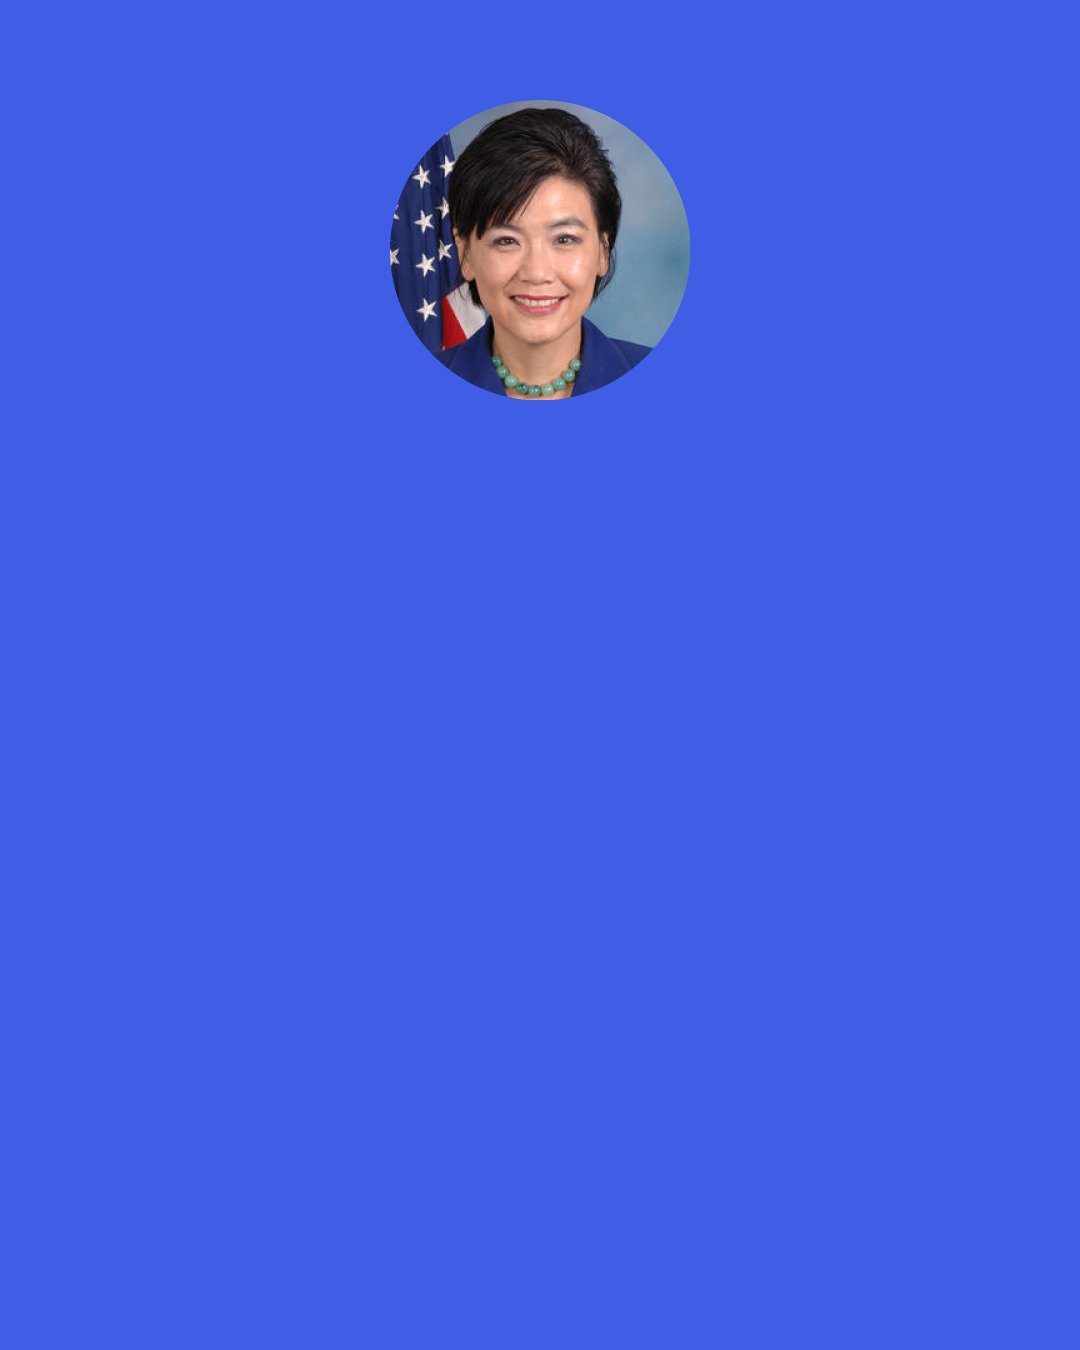 Judy Chu: Boys' connections—to other people and to their selves—can enable them to think and act of their own volition and to resist overly restrictive norms and expectation when they are faced with pressures to conform.